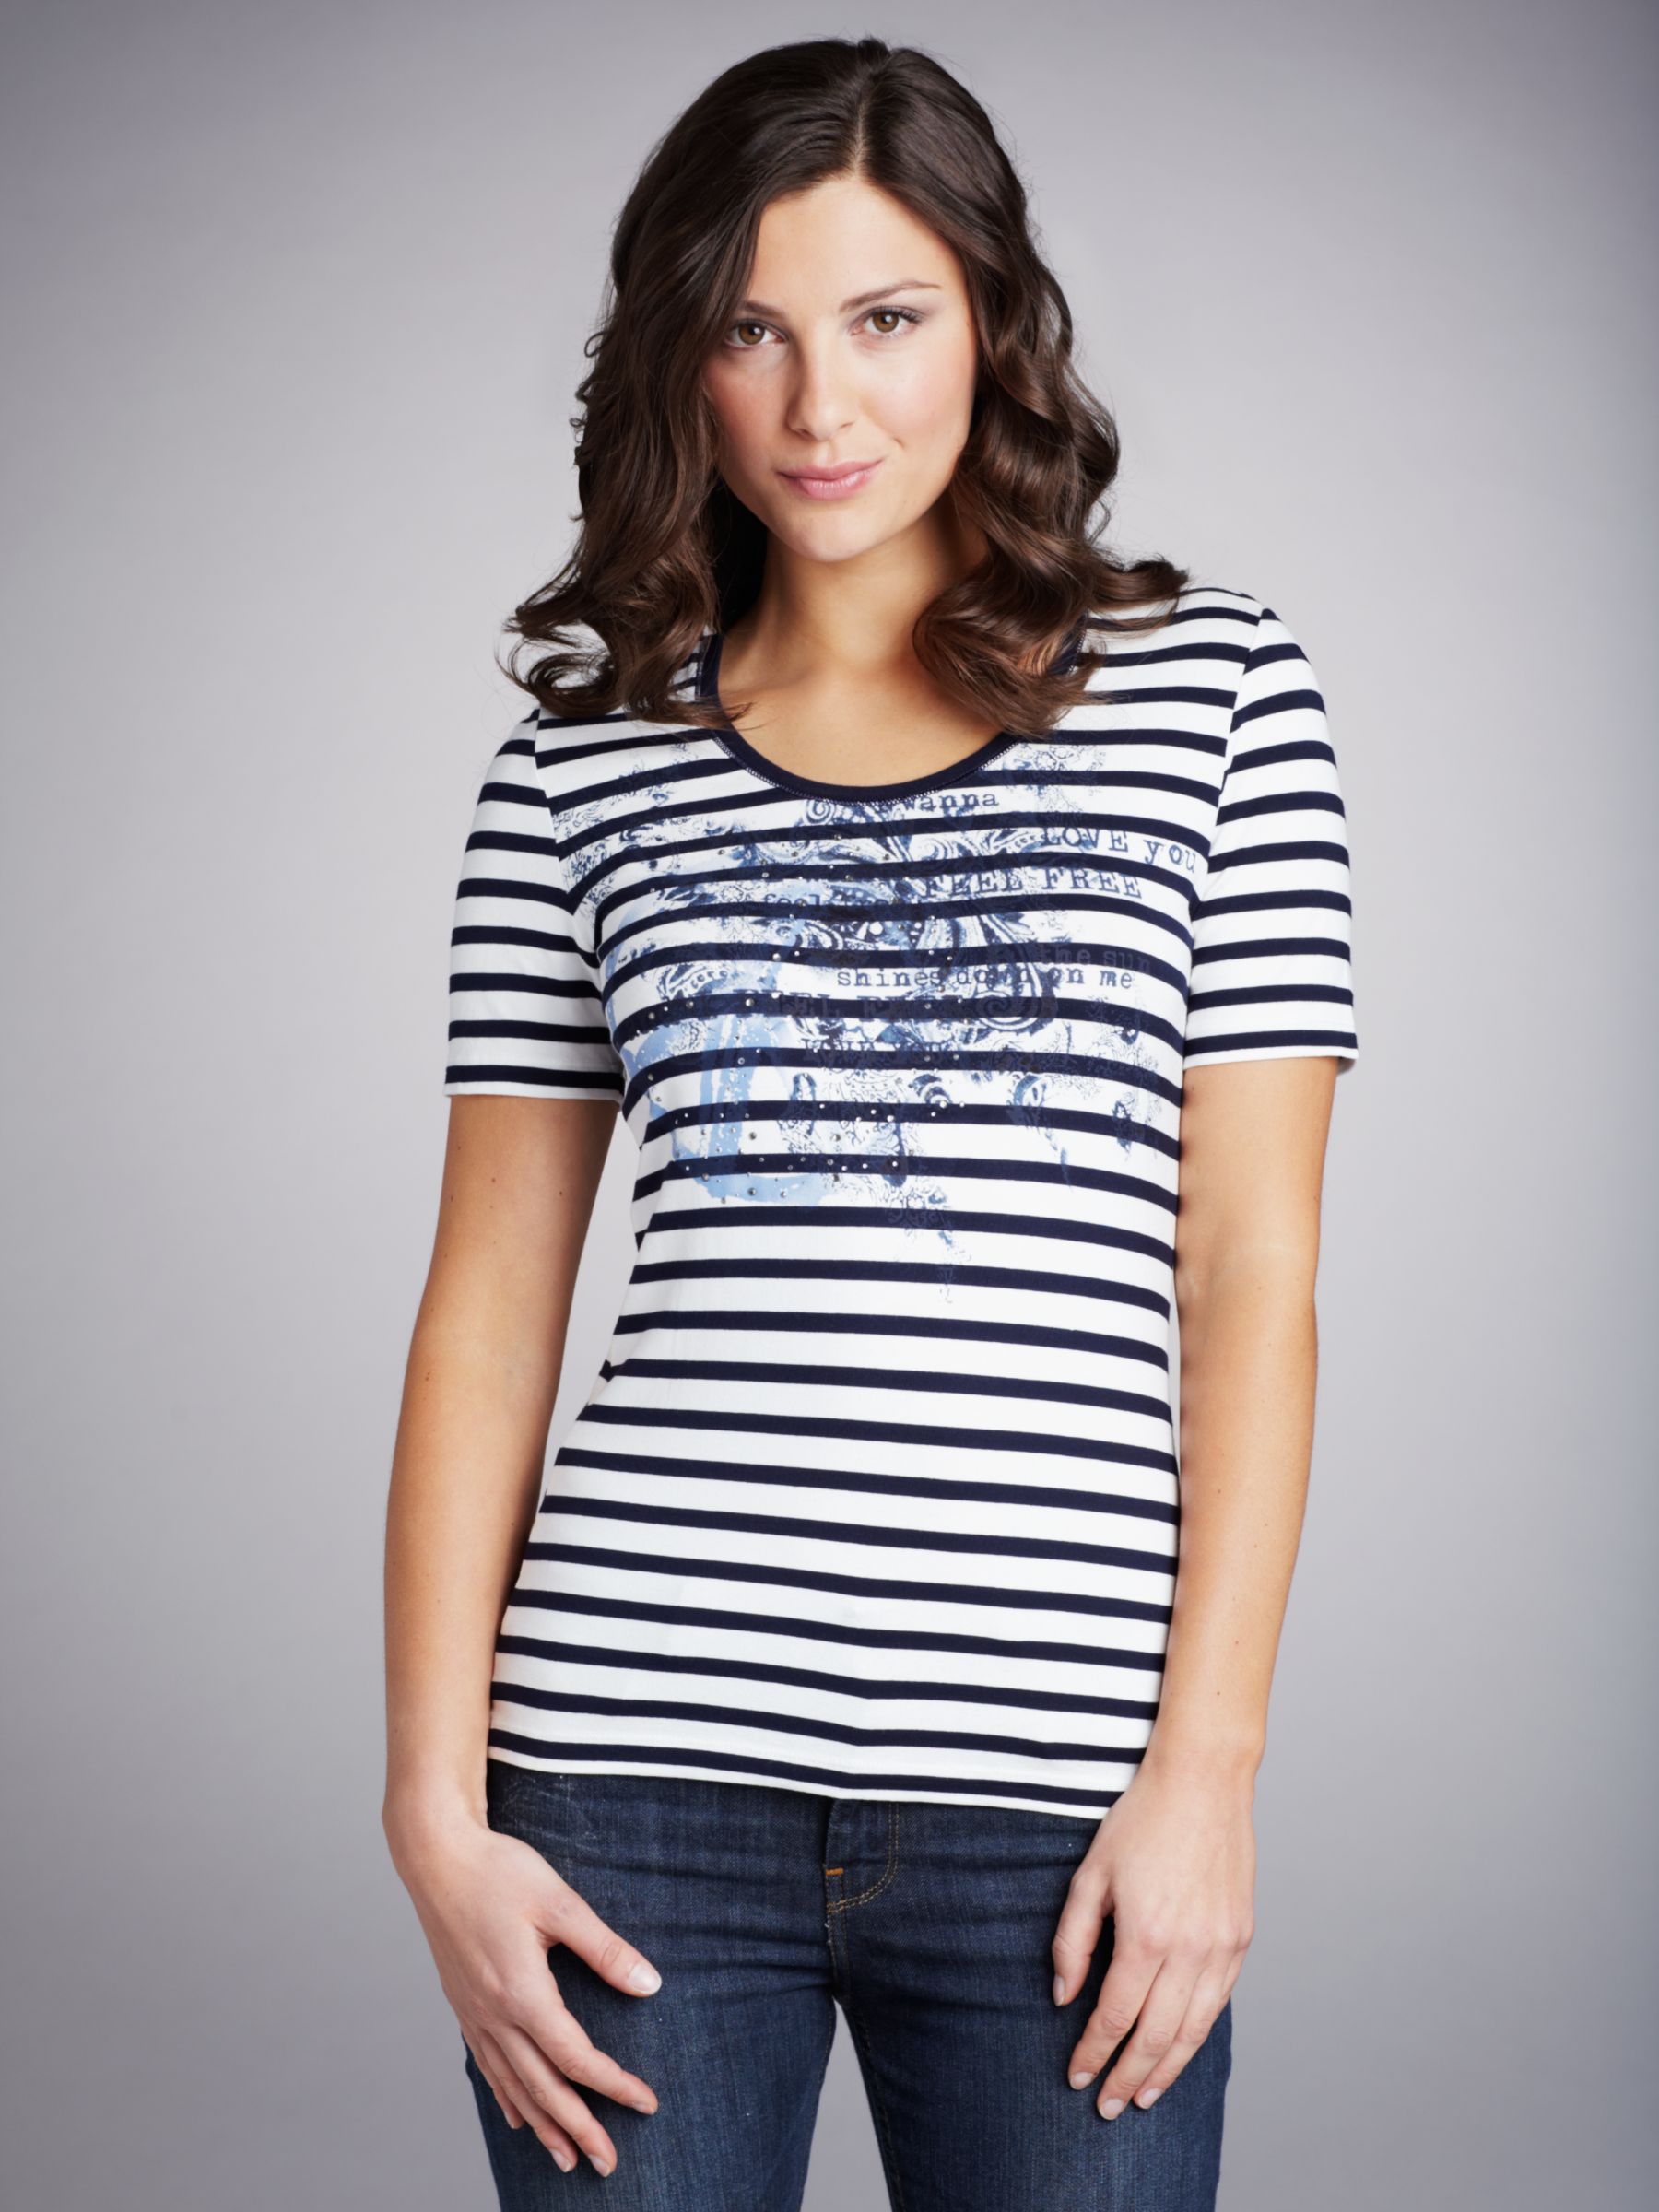 Placement Print Striped T-Shirt,